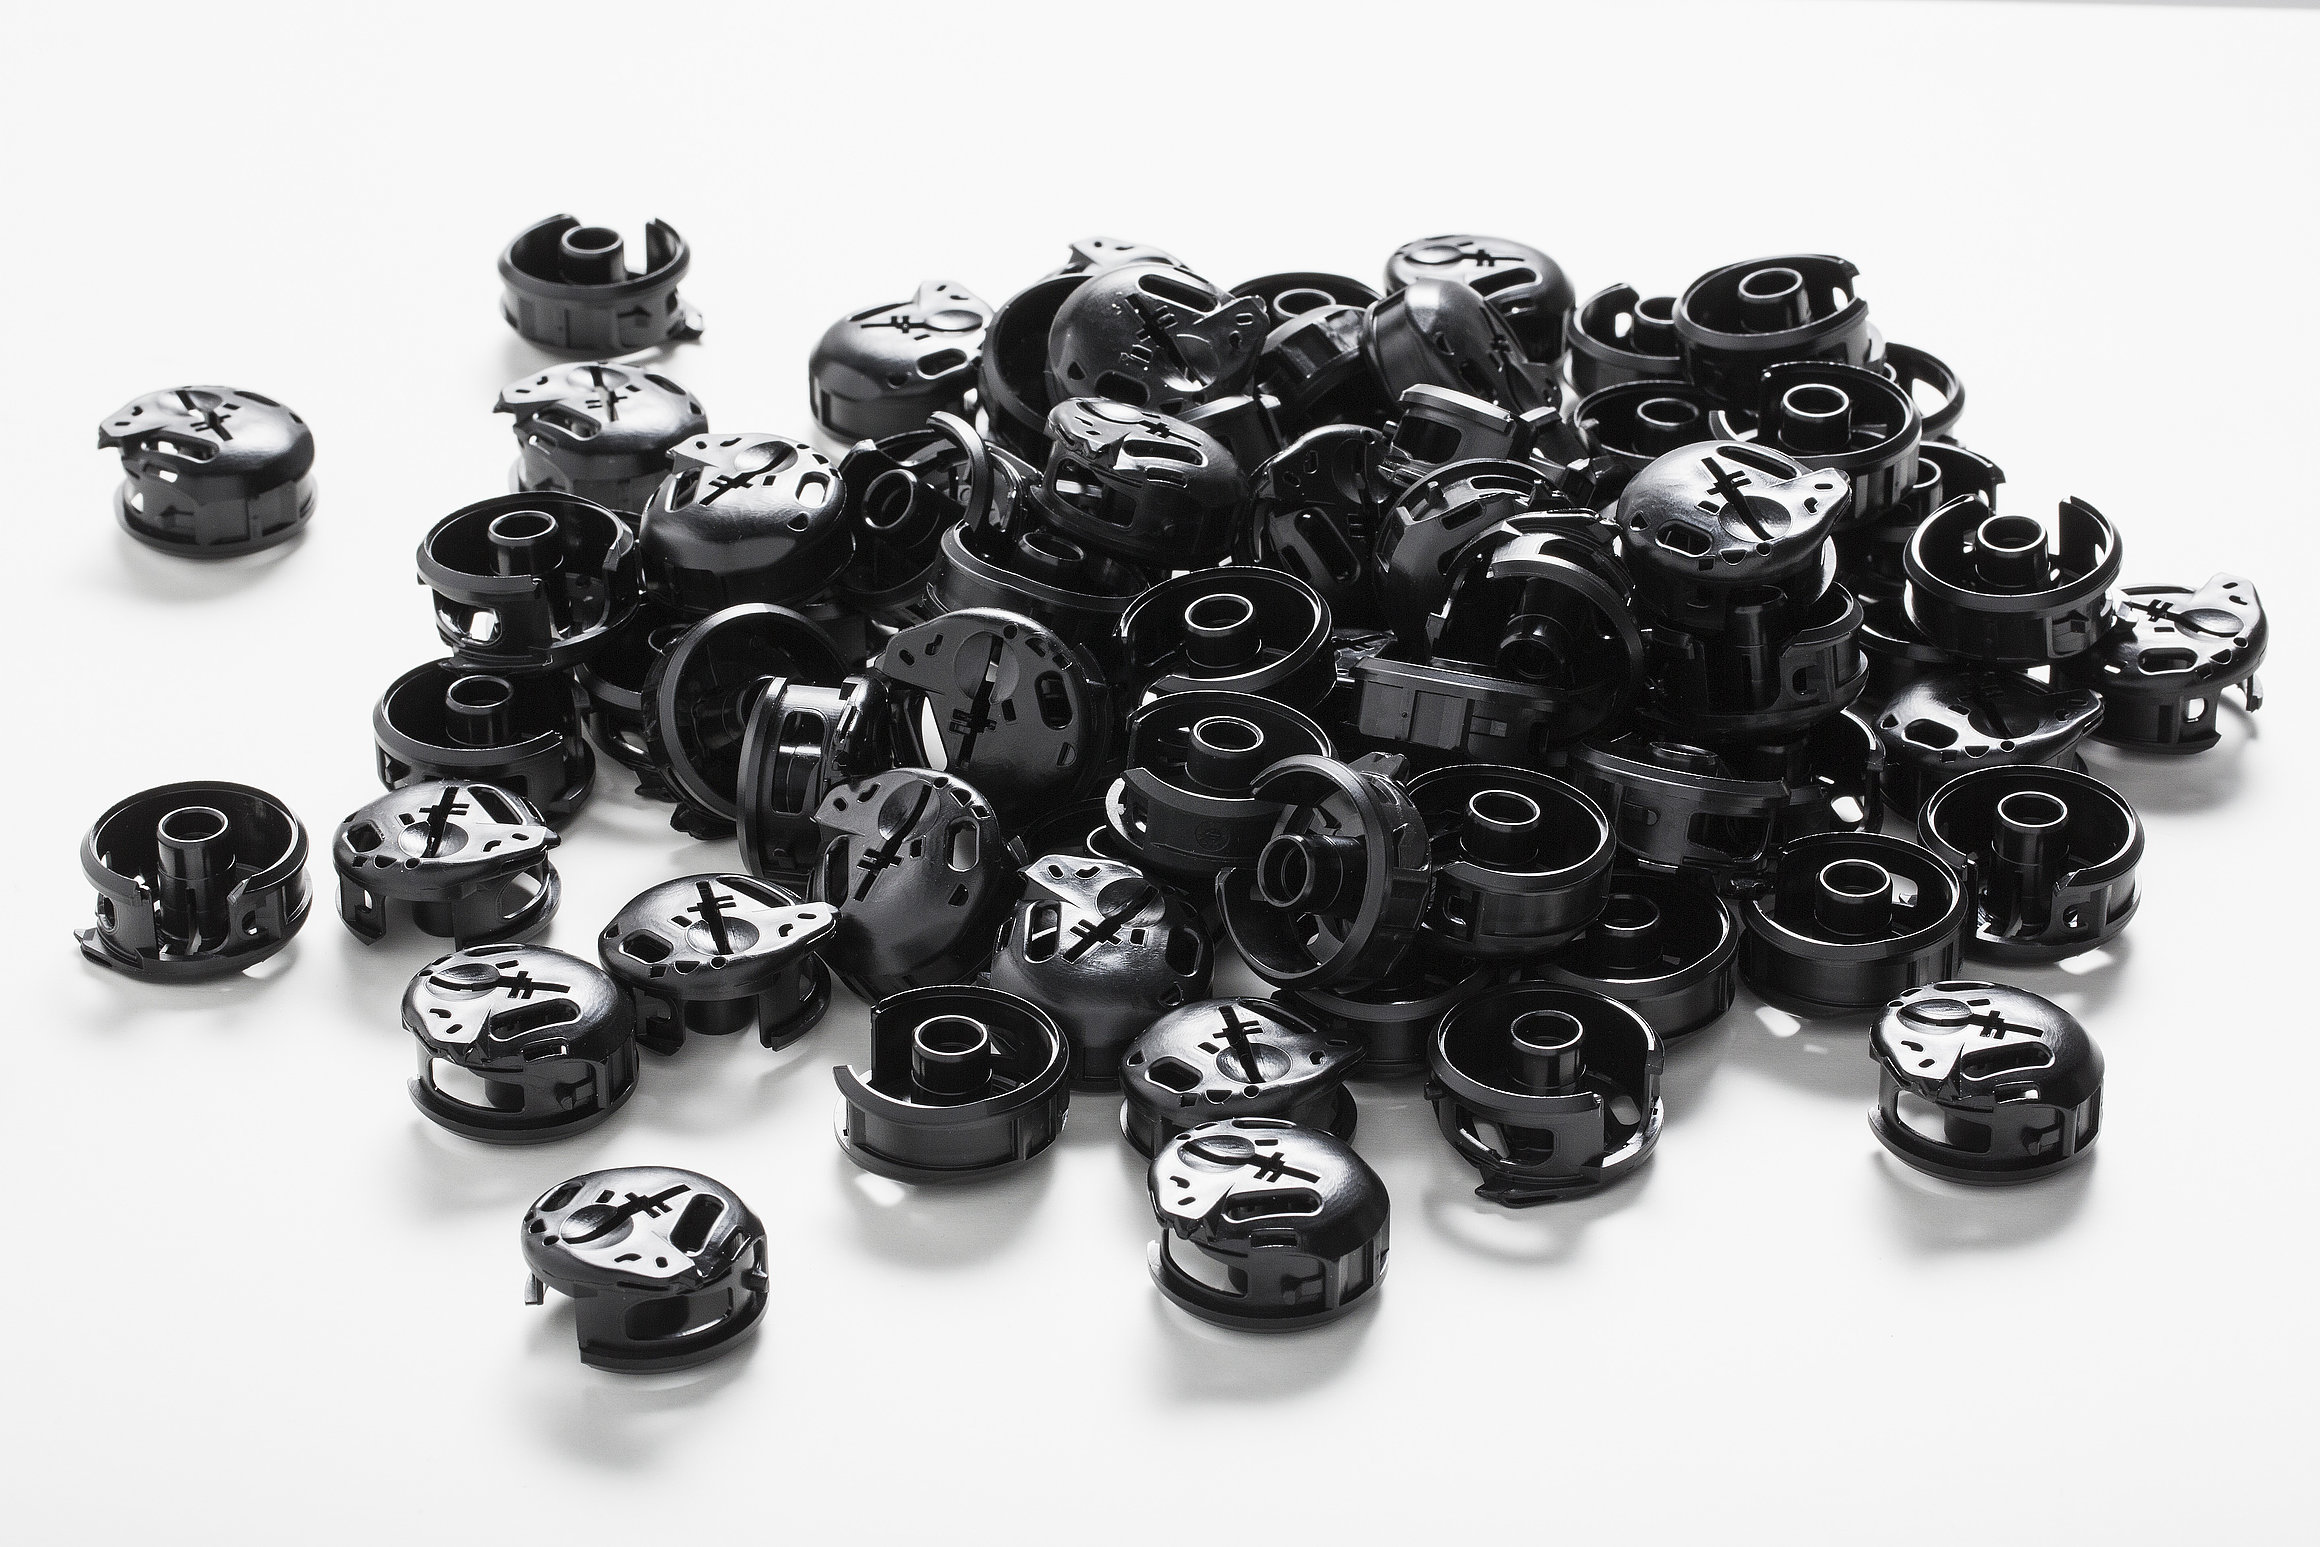 The picture shows black plastic injection molded parts